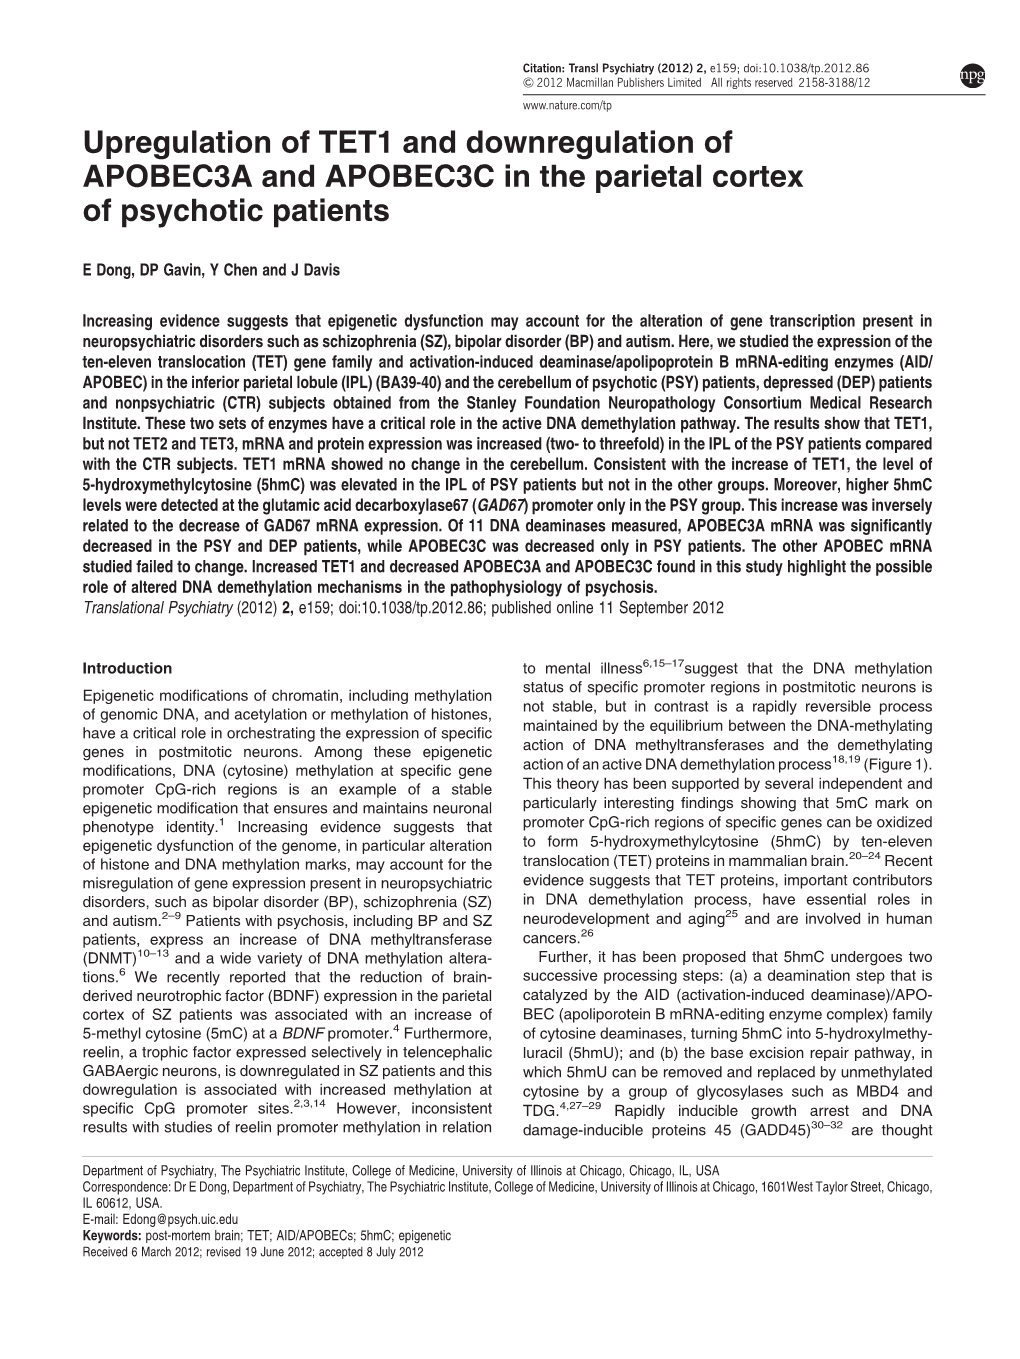 Upregulation of TET1 and Downregulation of APOBEC3A and APOBEC3C in the Parietal Cortex of Psychotic Patients